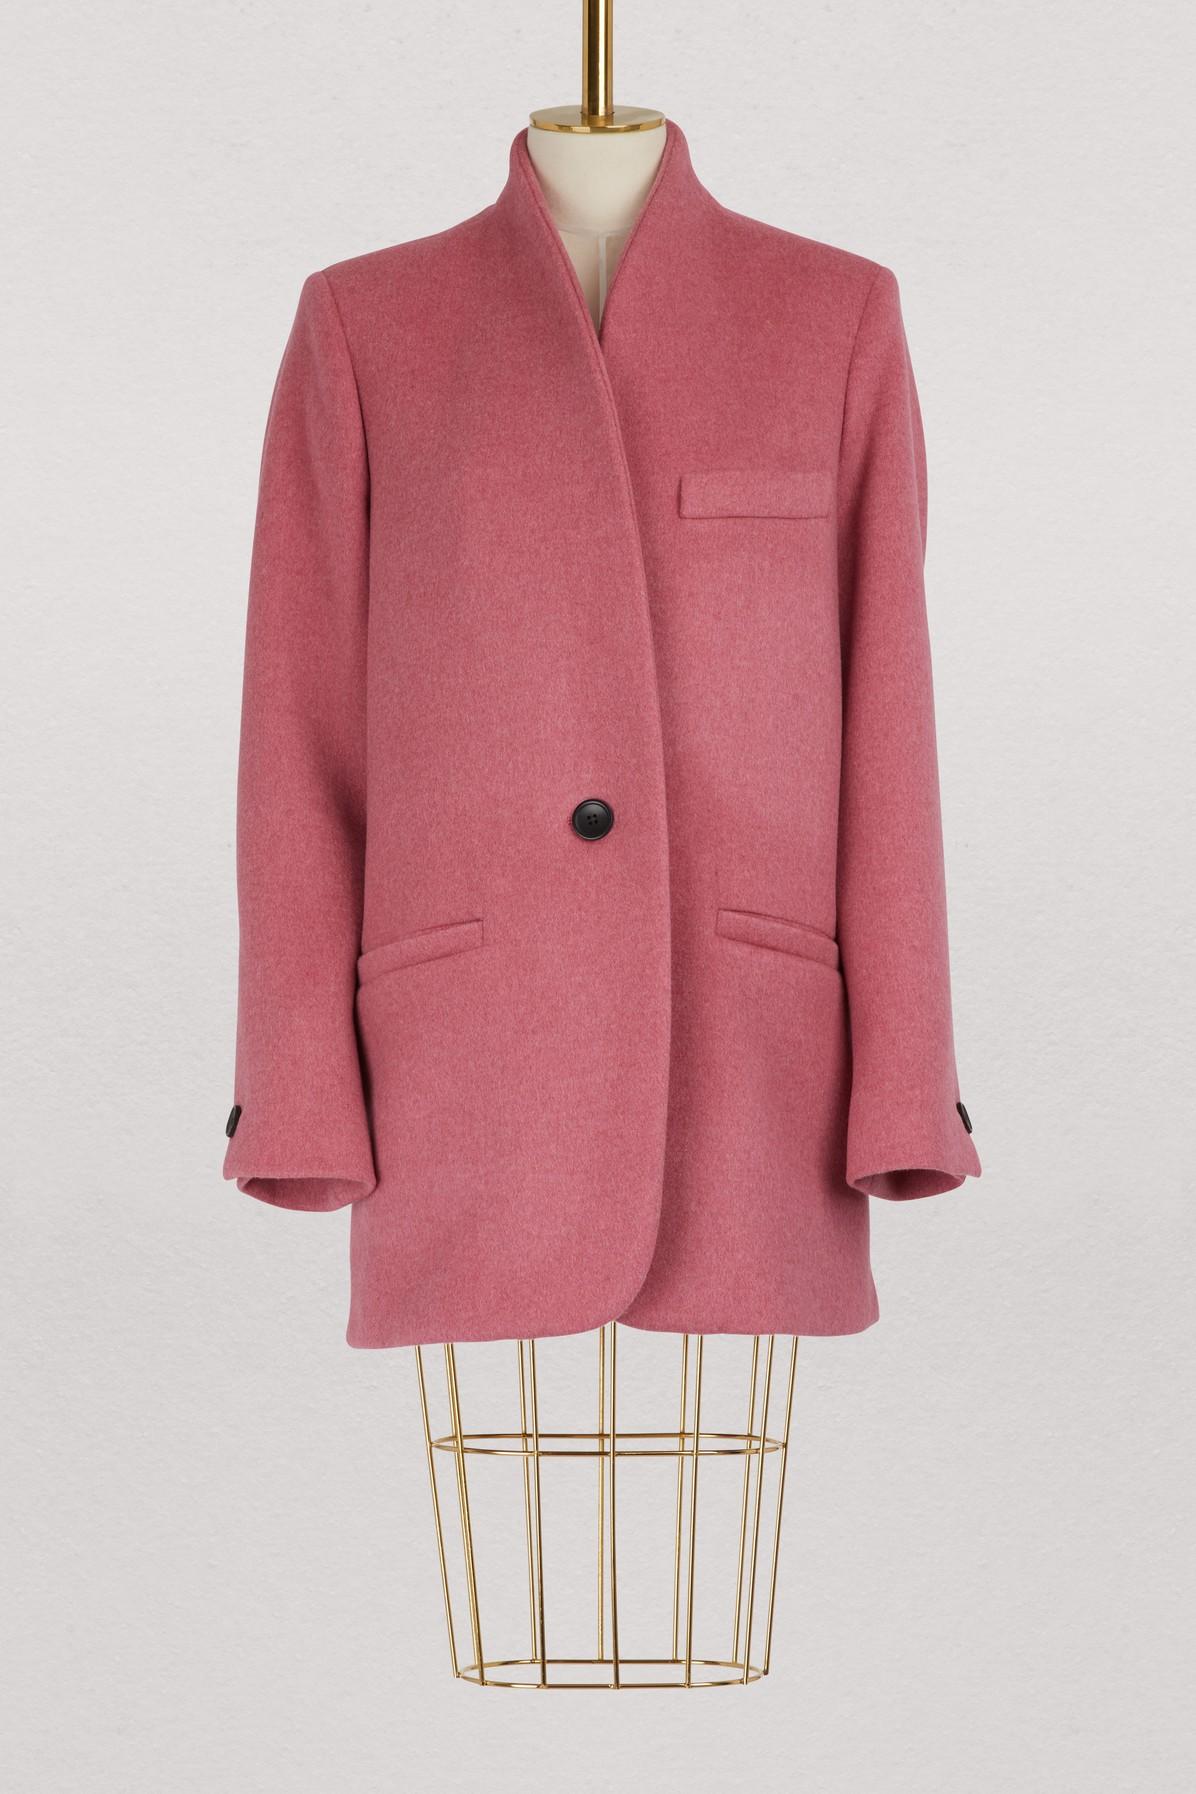 Isabel Marant Wool And Cashmere Felis Jacket In Pink | ModeSens